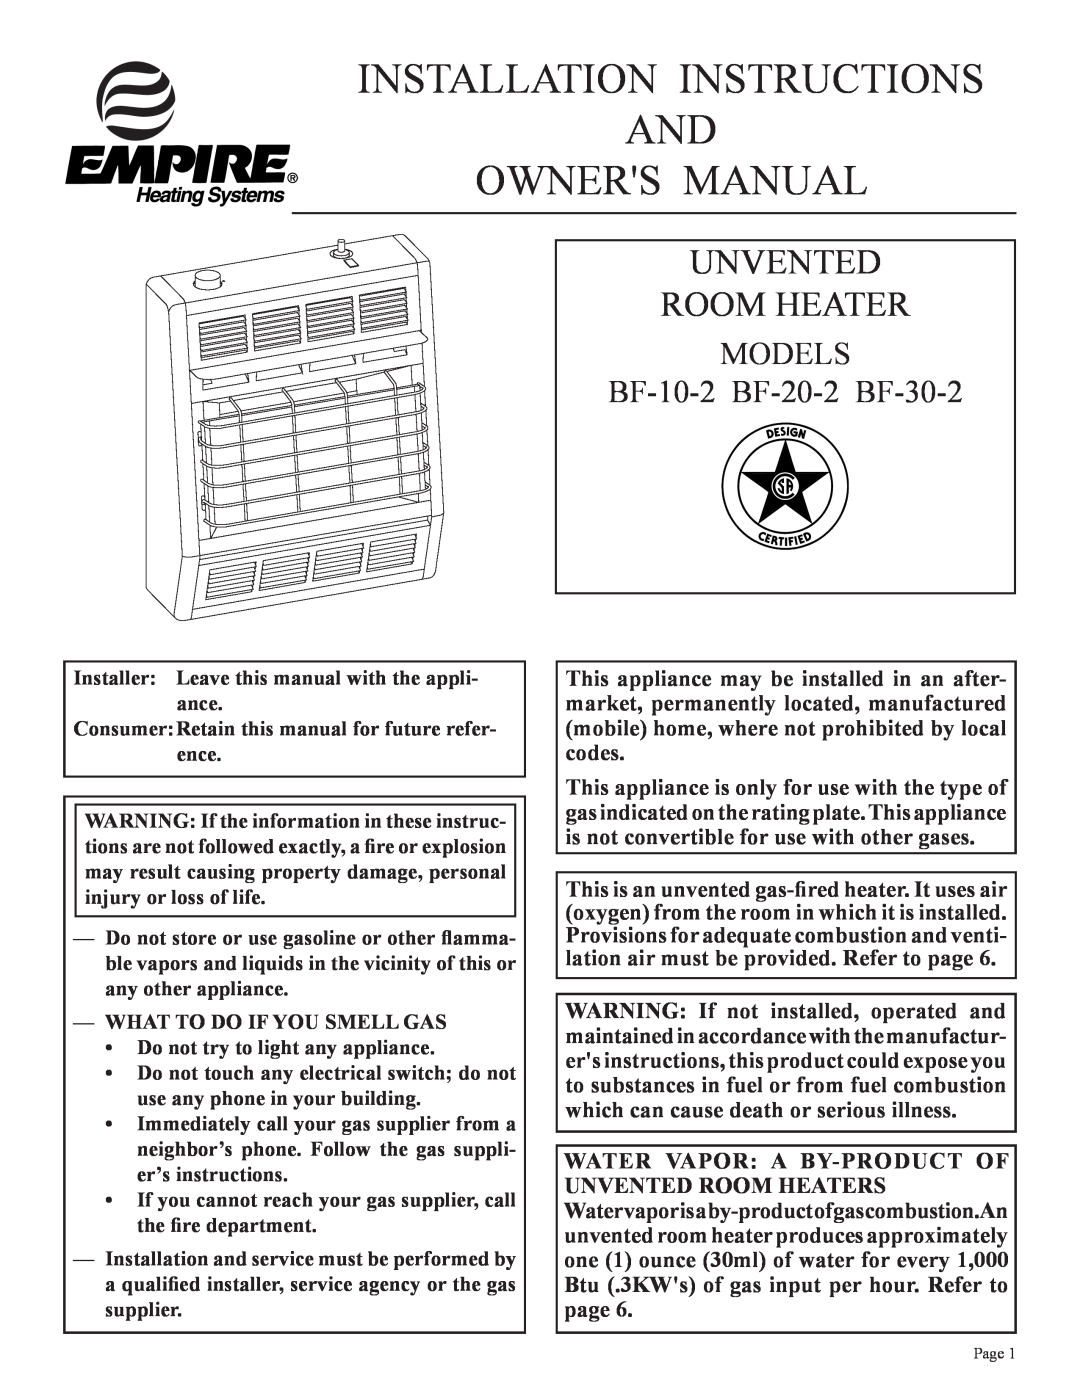 Empire Comfort Systems installation instructions MODELS BF-10-2 BF-20-2 BF-30-2, Unvented Room Heater 